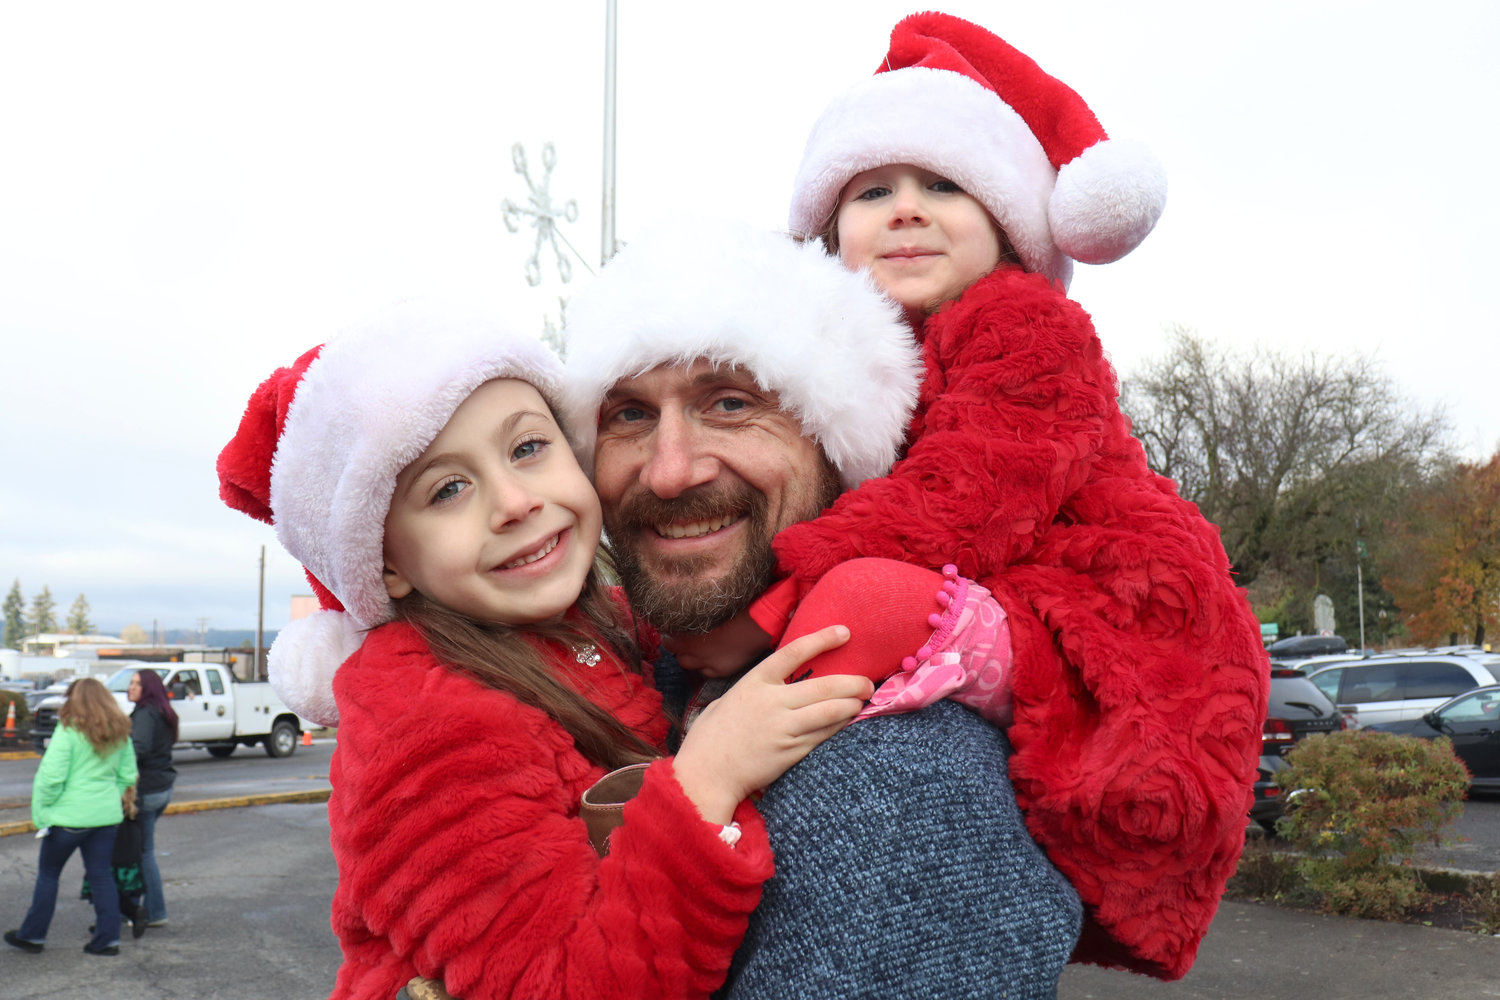 John Hornby lifts 3-year-old Anya on his shoulders and holds 6-year-old Luna to give both girls a better view of the Santa Parade in downtown Chehalis on Saturday.